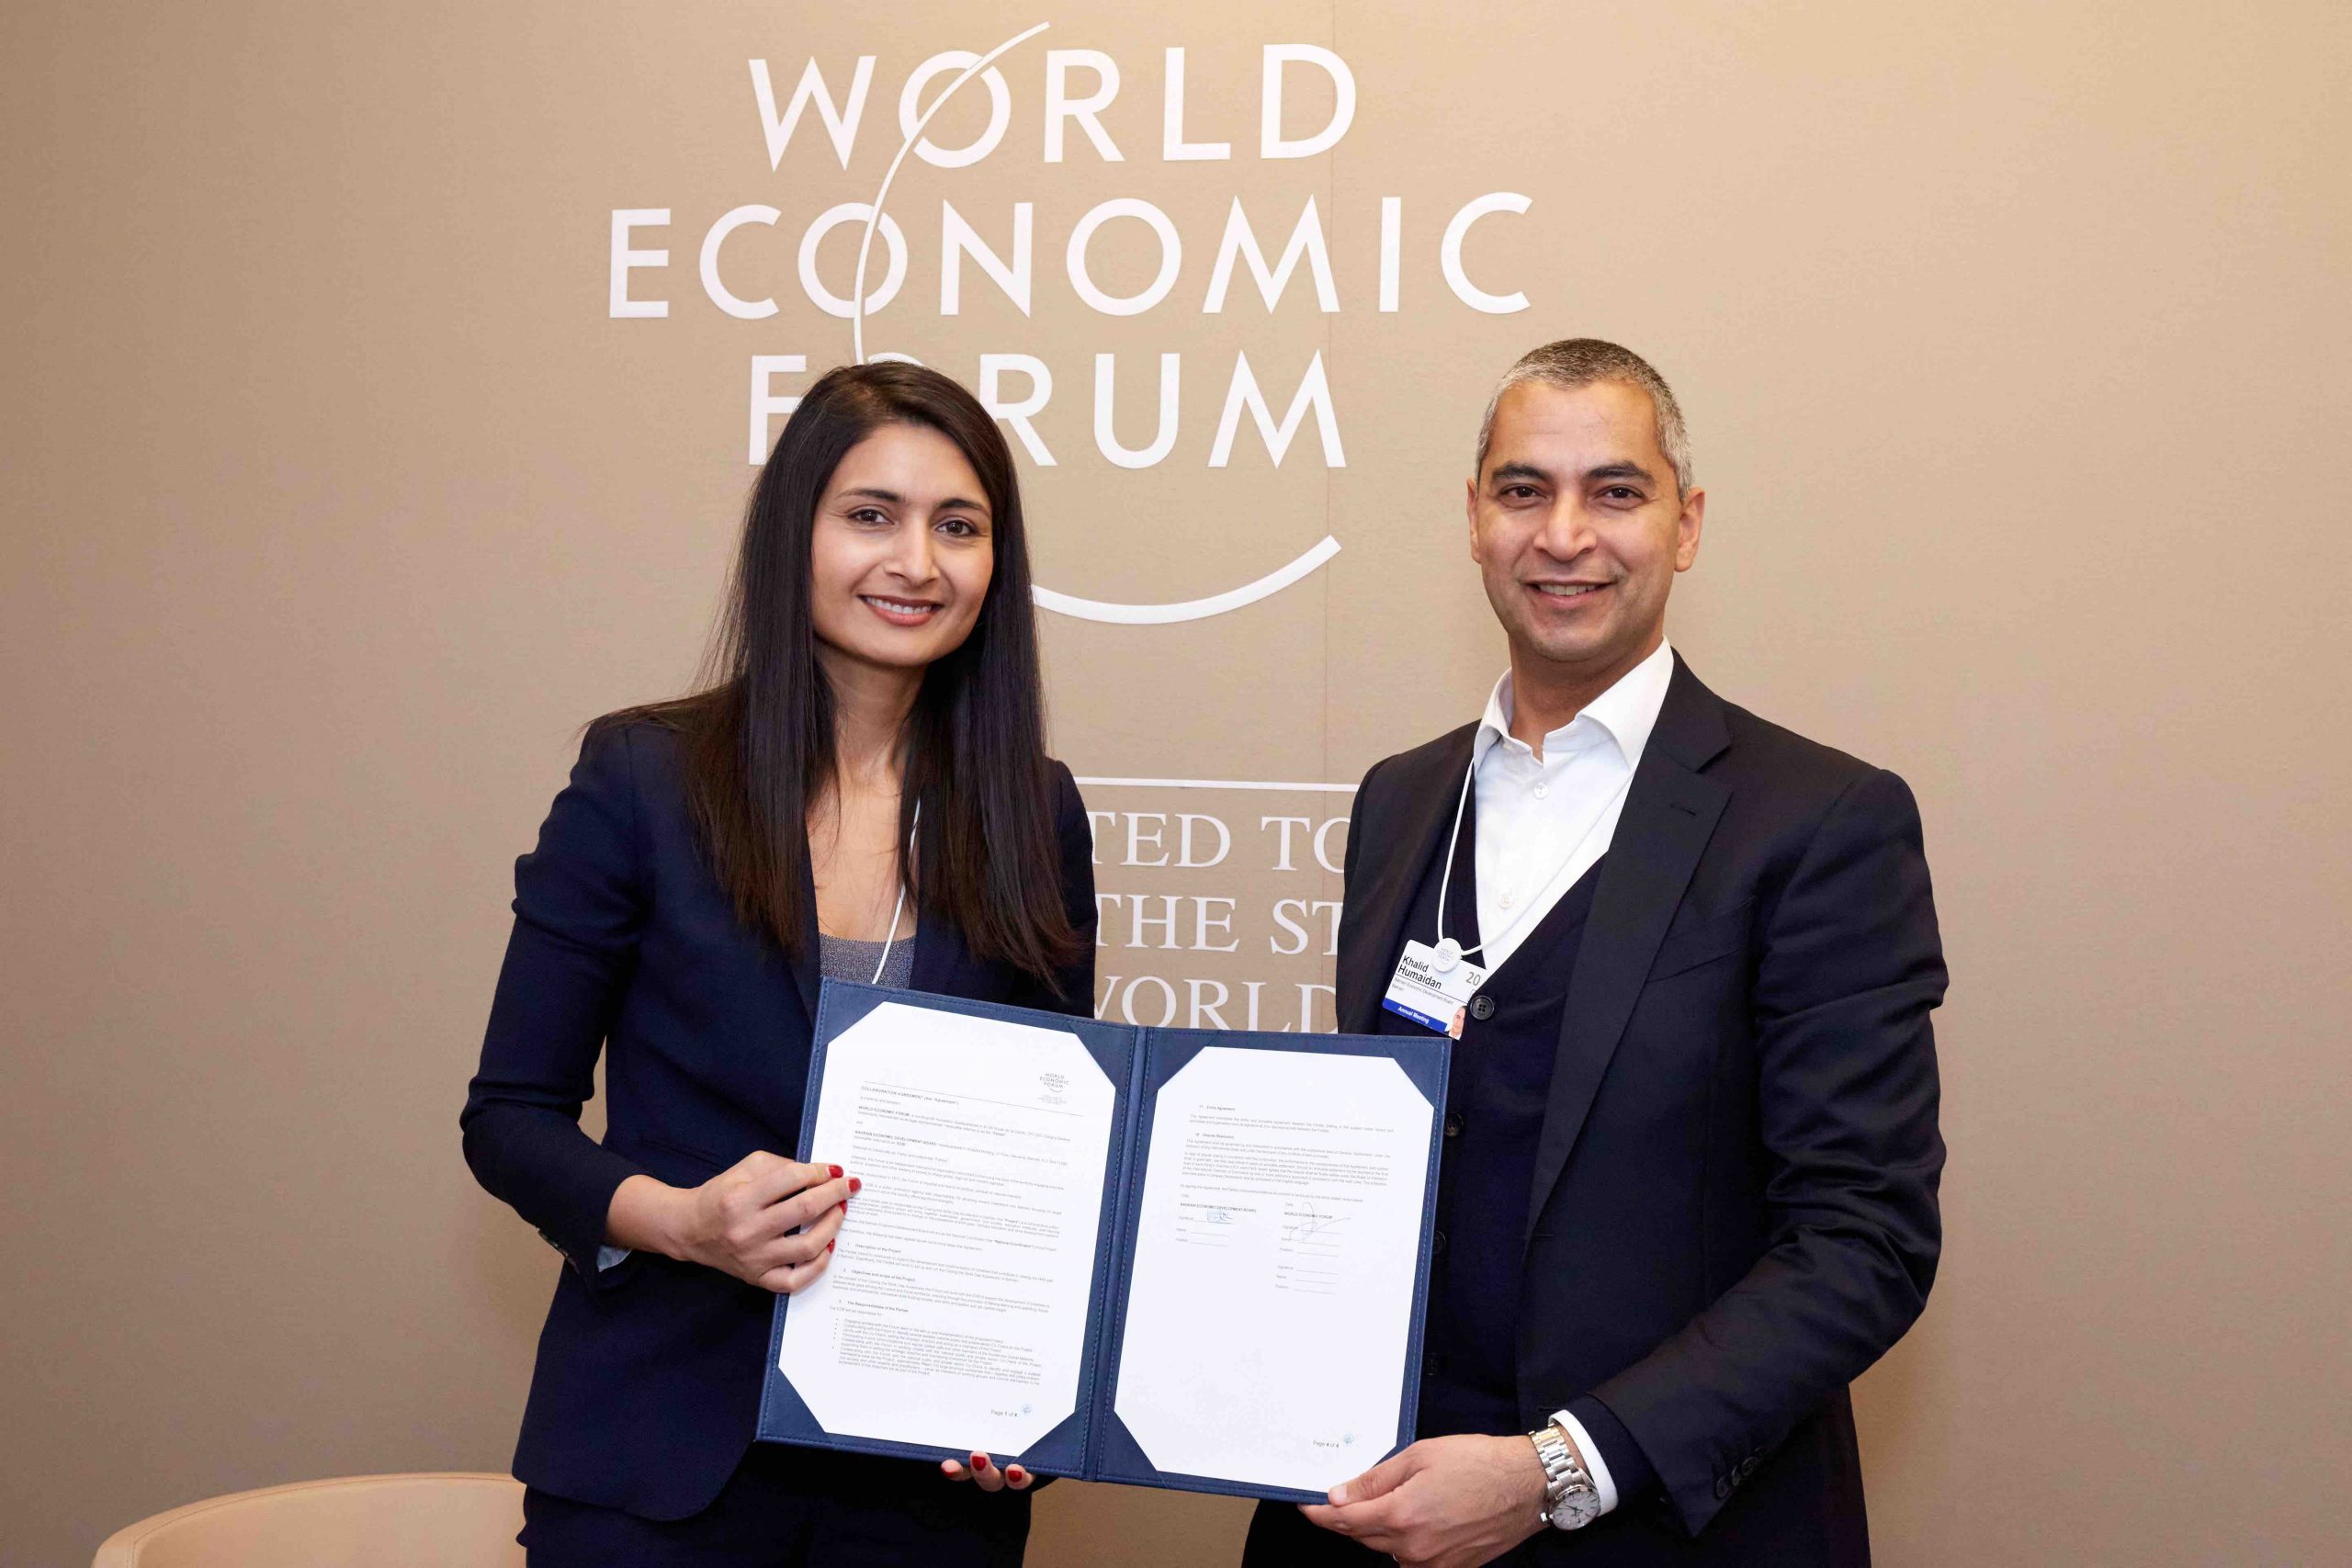 Bahrain partners with the World Economic Forum to launch ‘Closing the Skills Gap’ accelerator